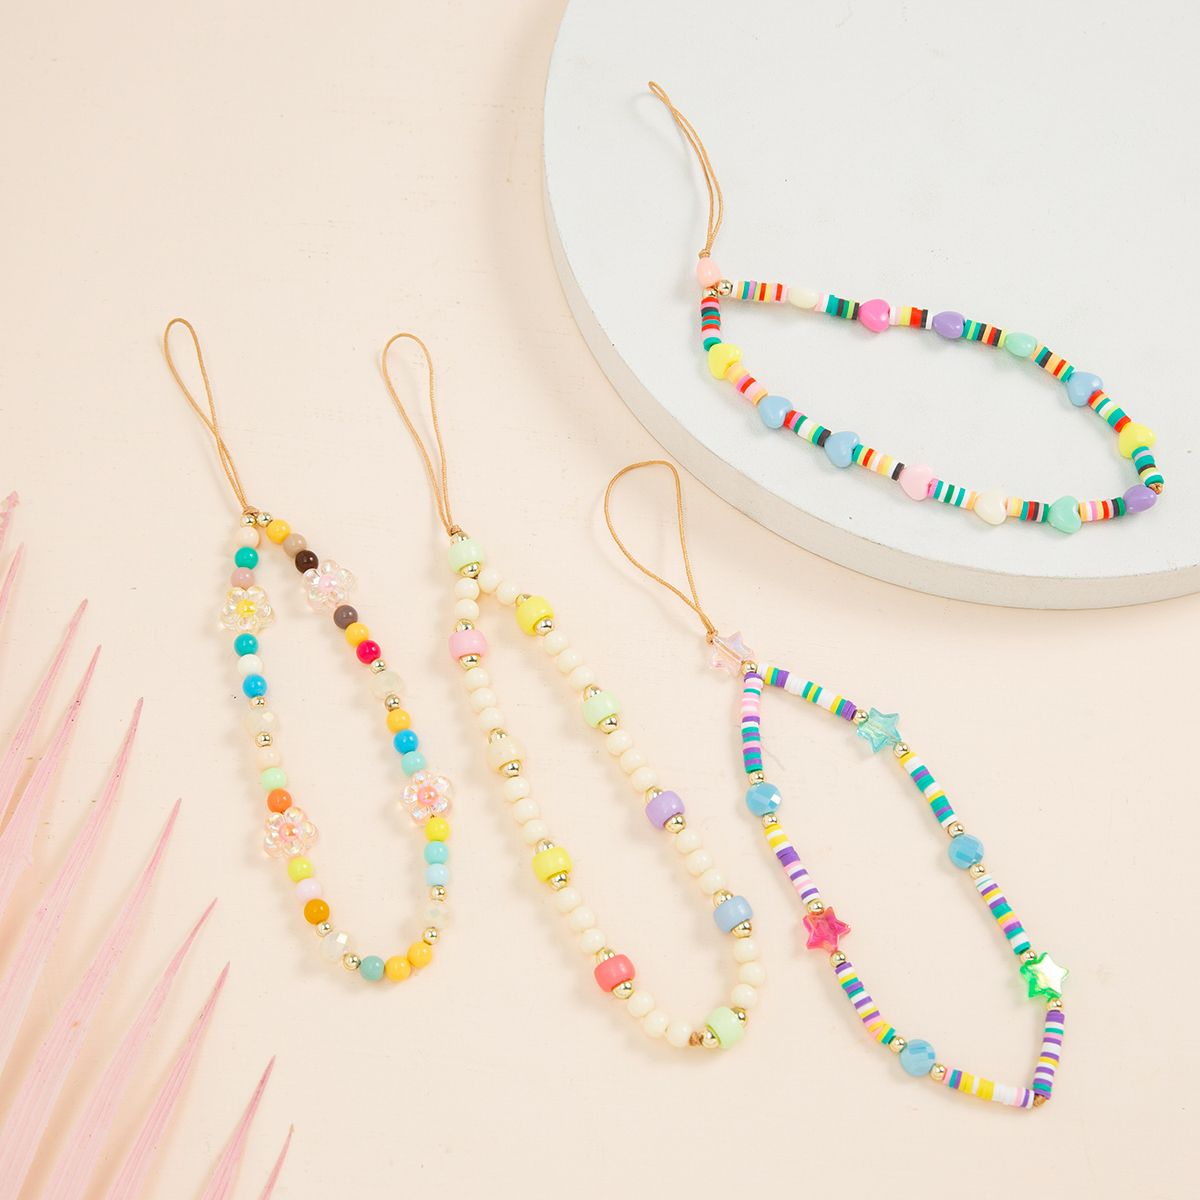 LWGHWL New Colorful Acrylic Bead Anti-Lost Phone Chain Cell Phone Case Hanging Cord Mobile Phone Strap Lanyard Soft Pottery Rope